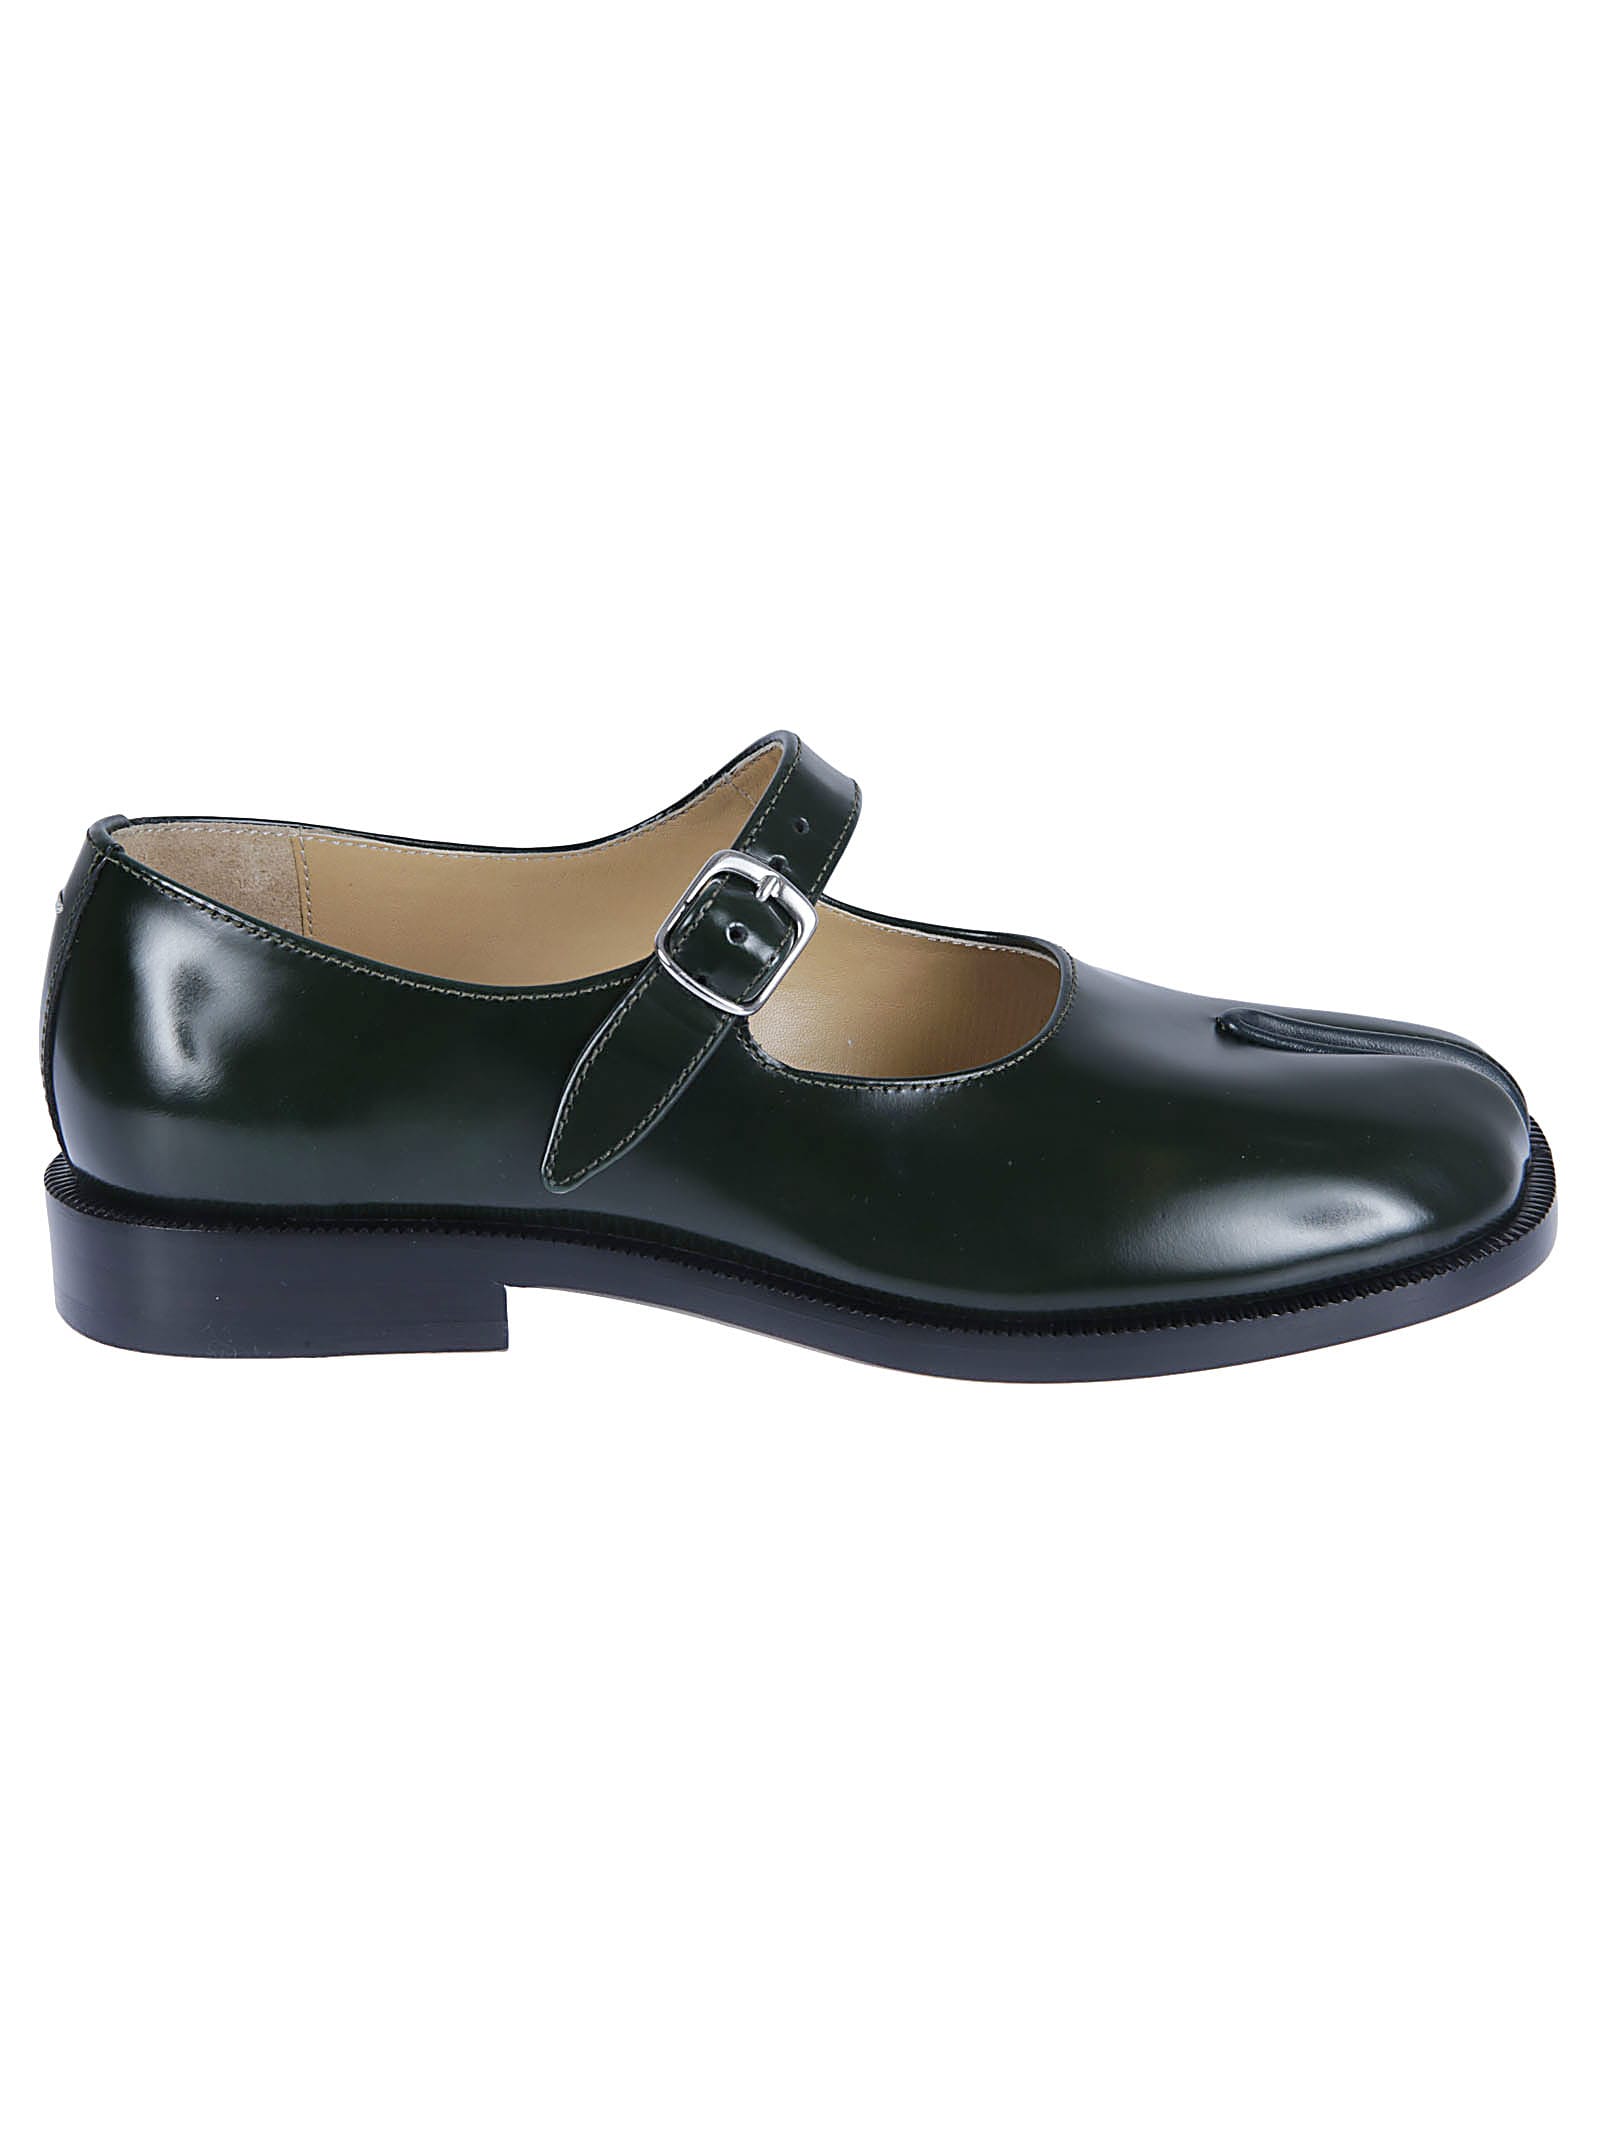 Maison Margiela Ankle Strap Loafers